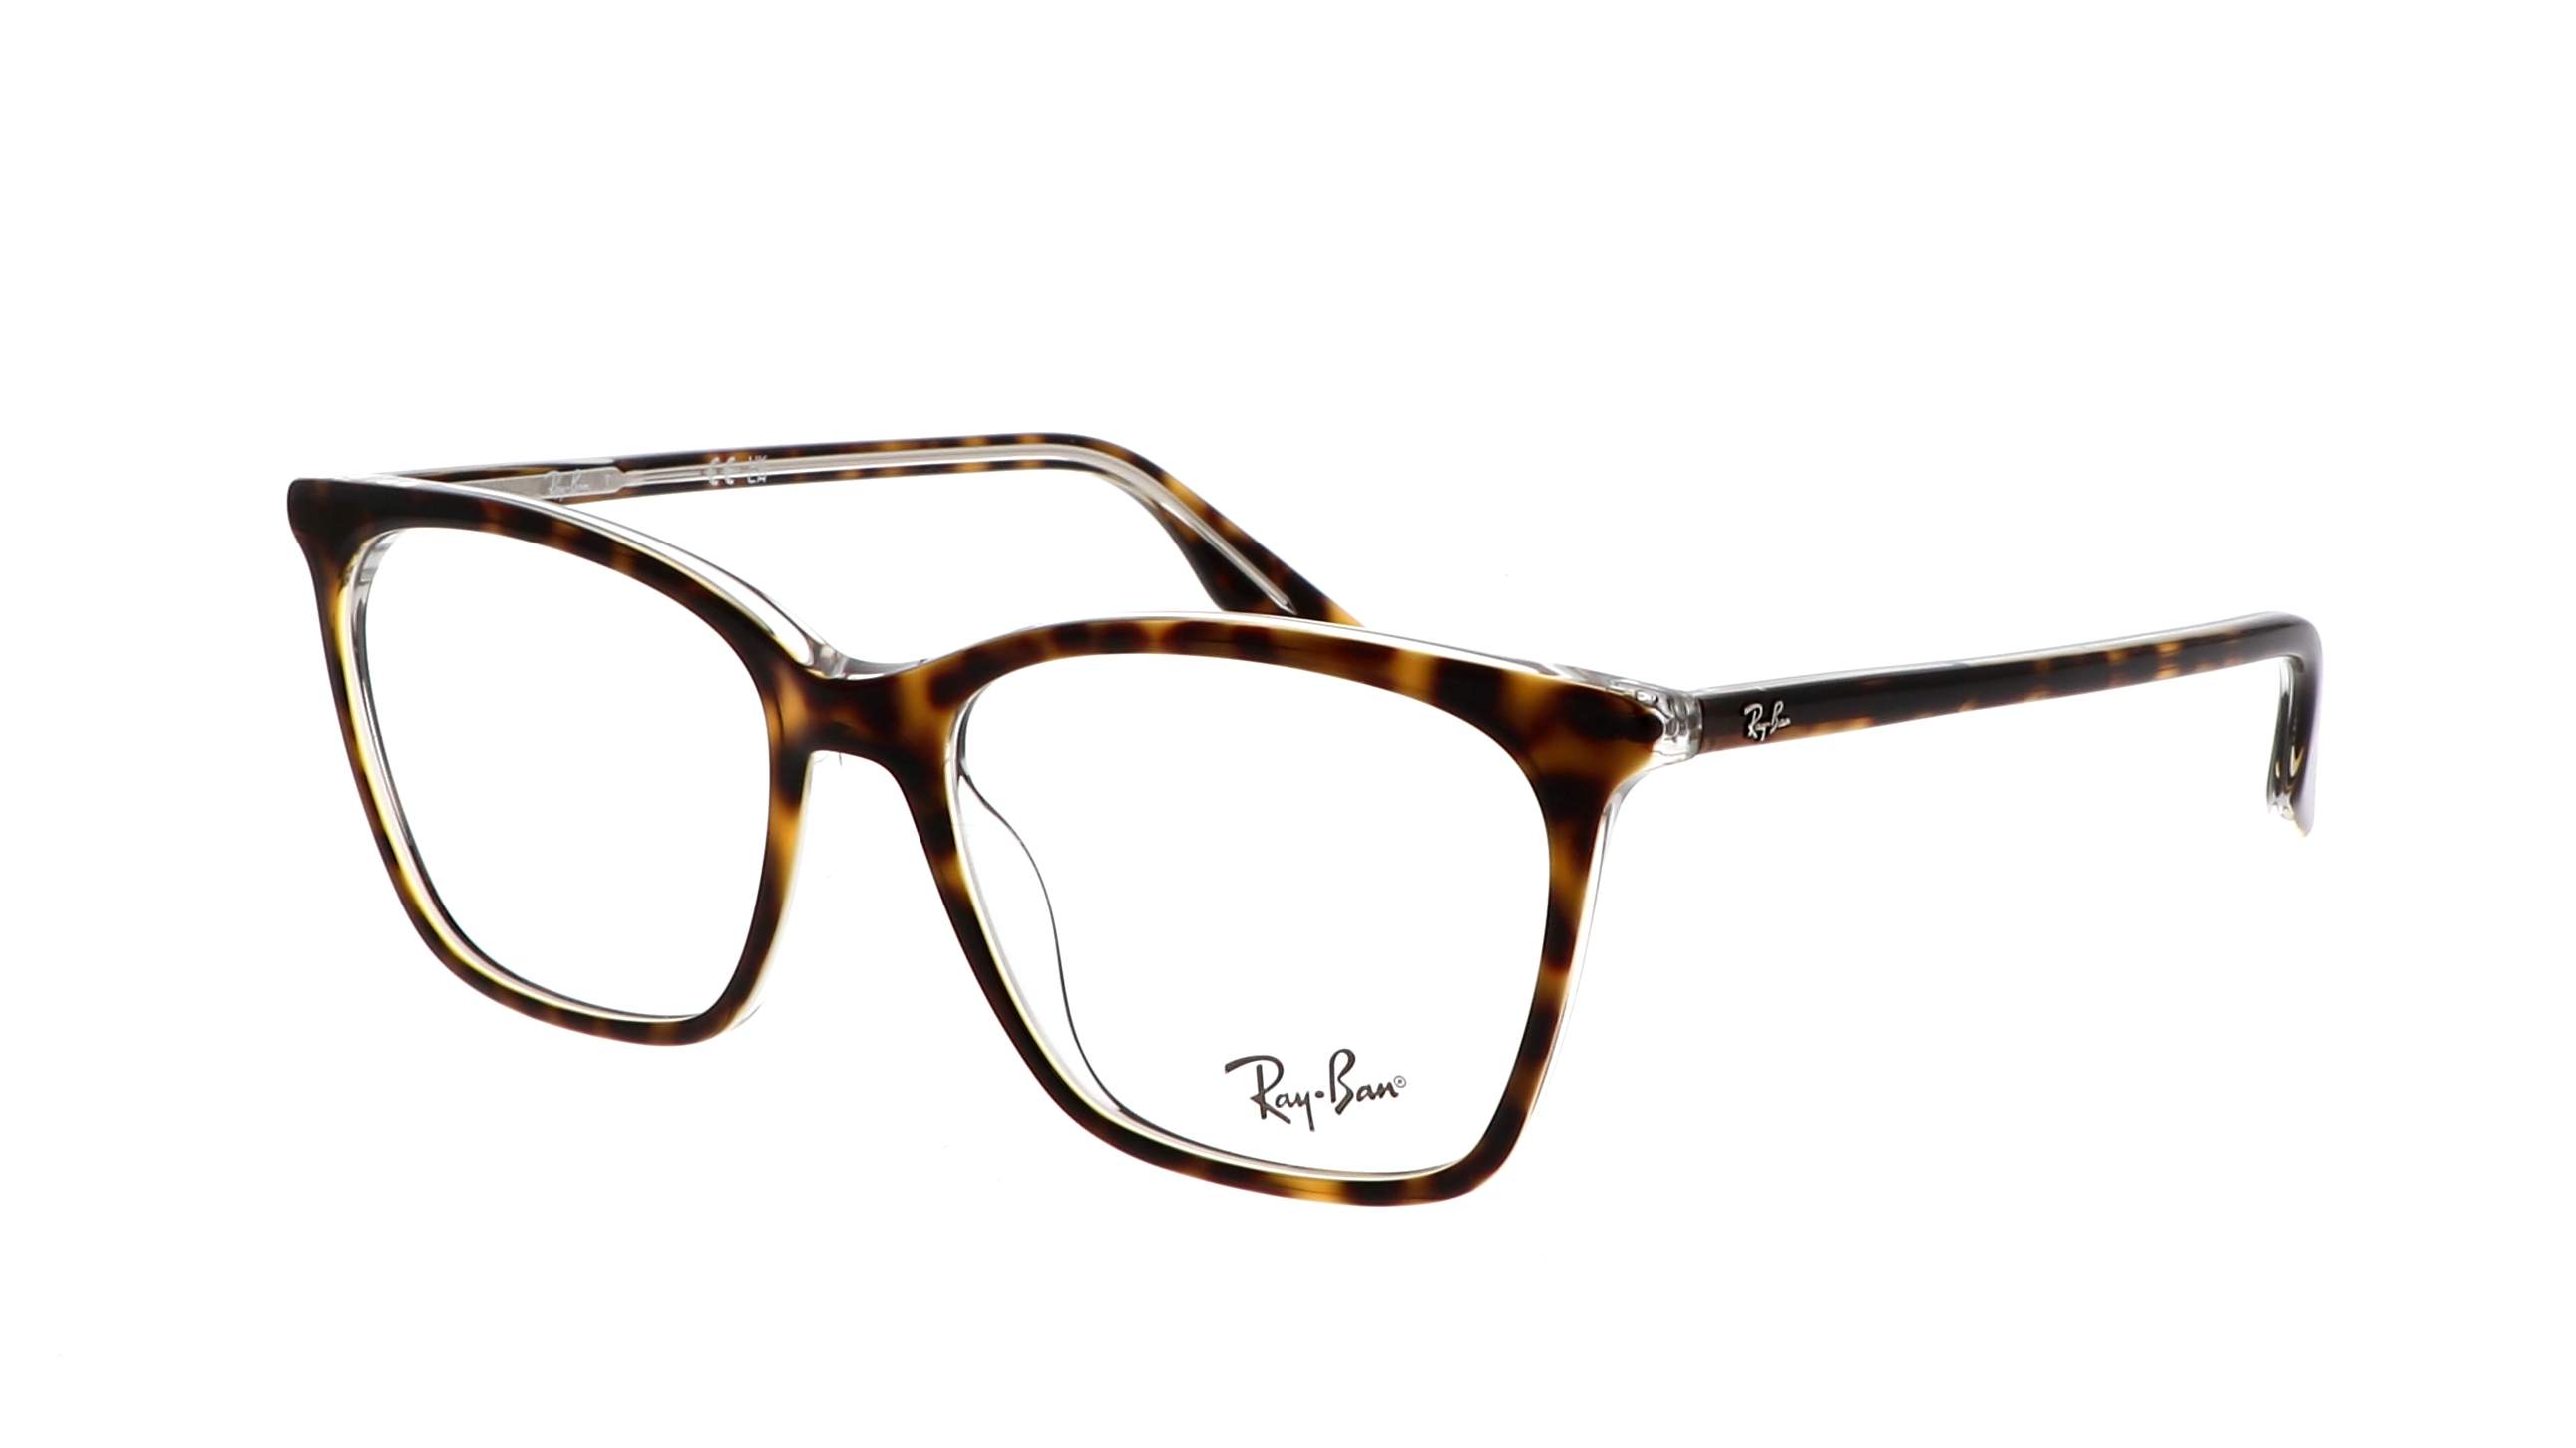 Eyeglasses Ray-Ban RX5422 RB5422 5082 52-16 Havana on transparent in ...